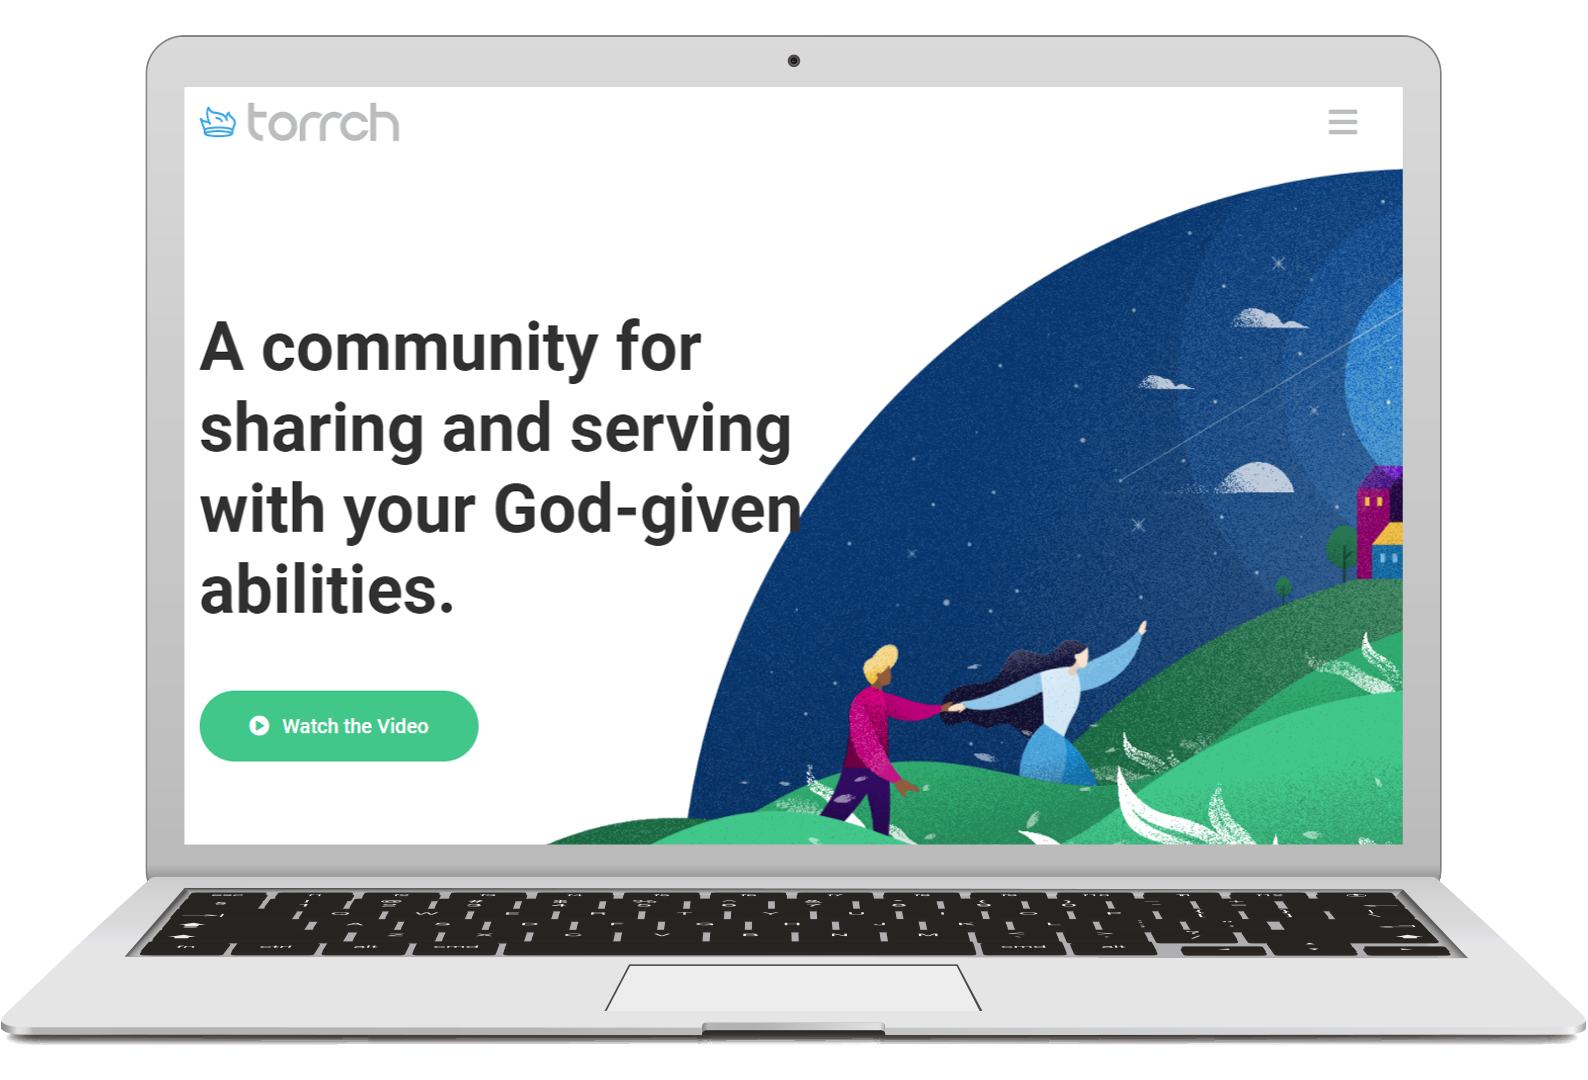 New Torrch Website - Tools for Community and Church Growth